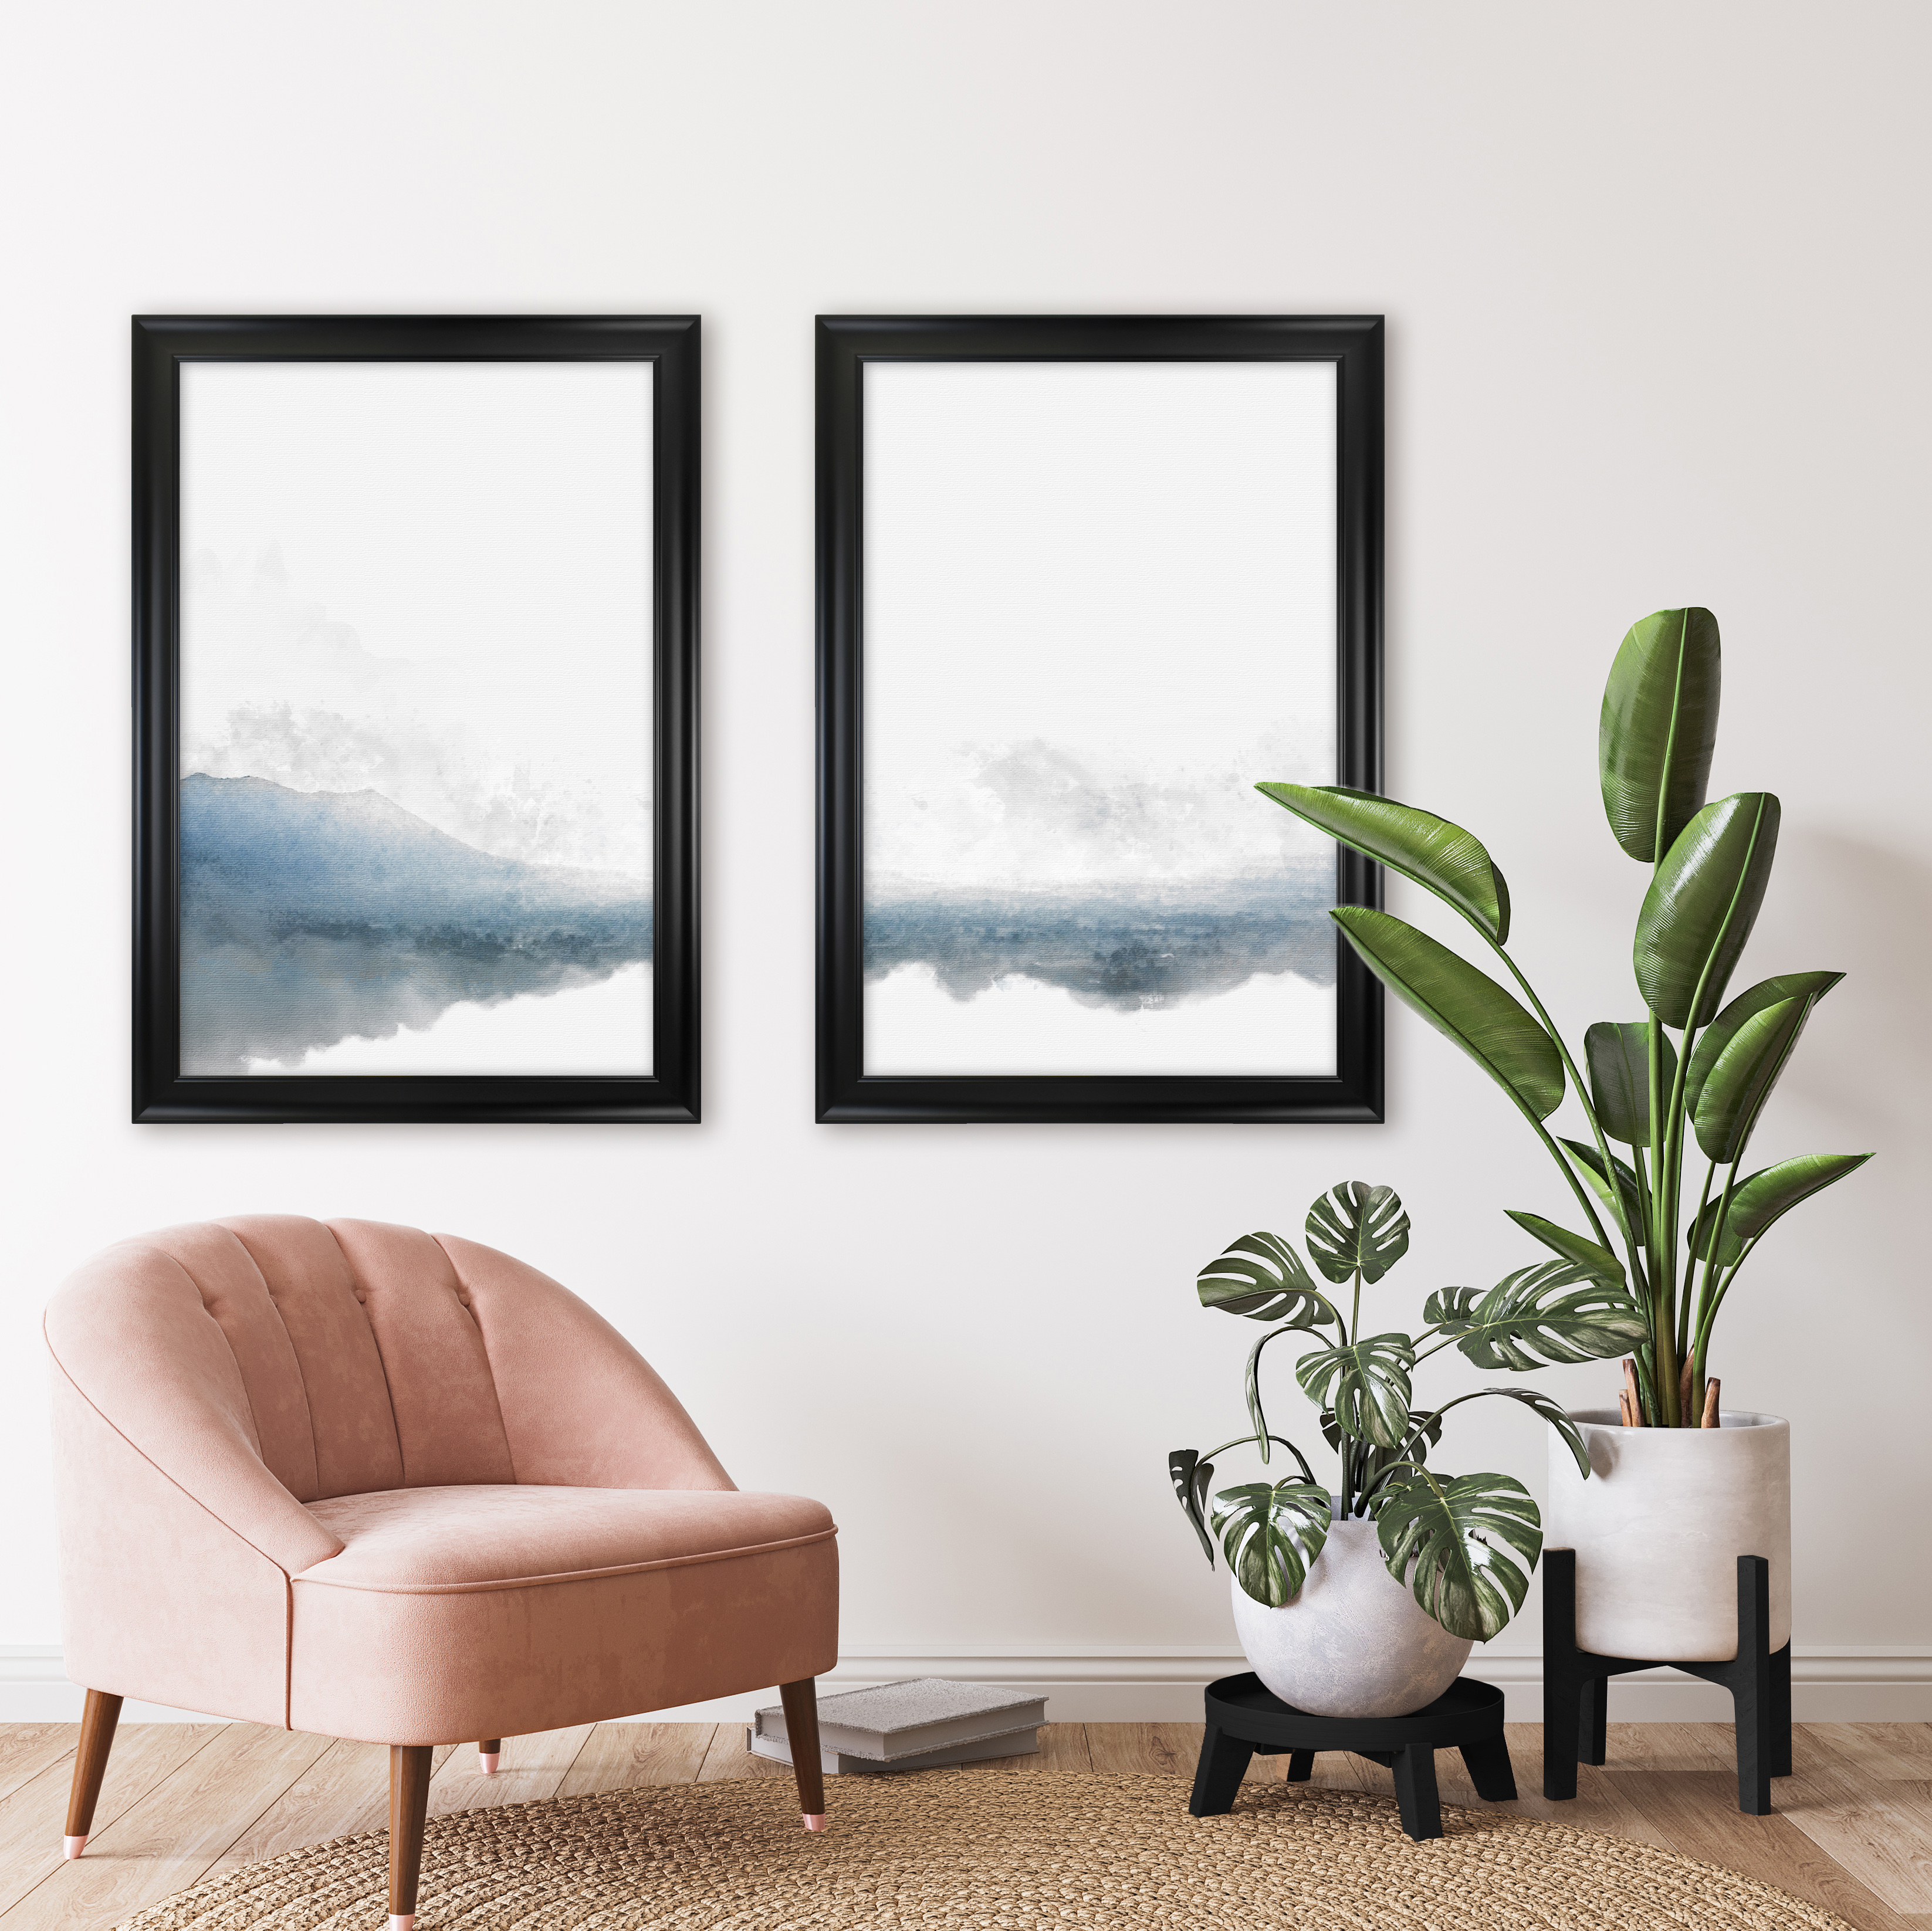 Mainstays 24x36 Wide Poster and Picture Frames, Black, Set of 2 - image 5 of 5